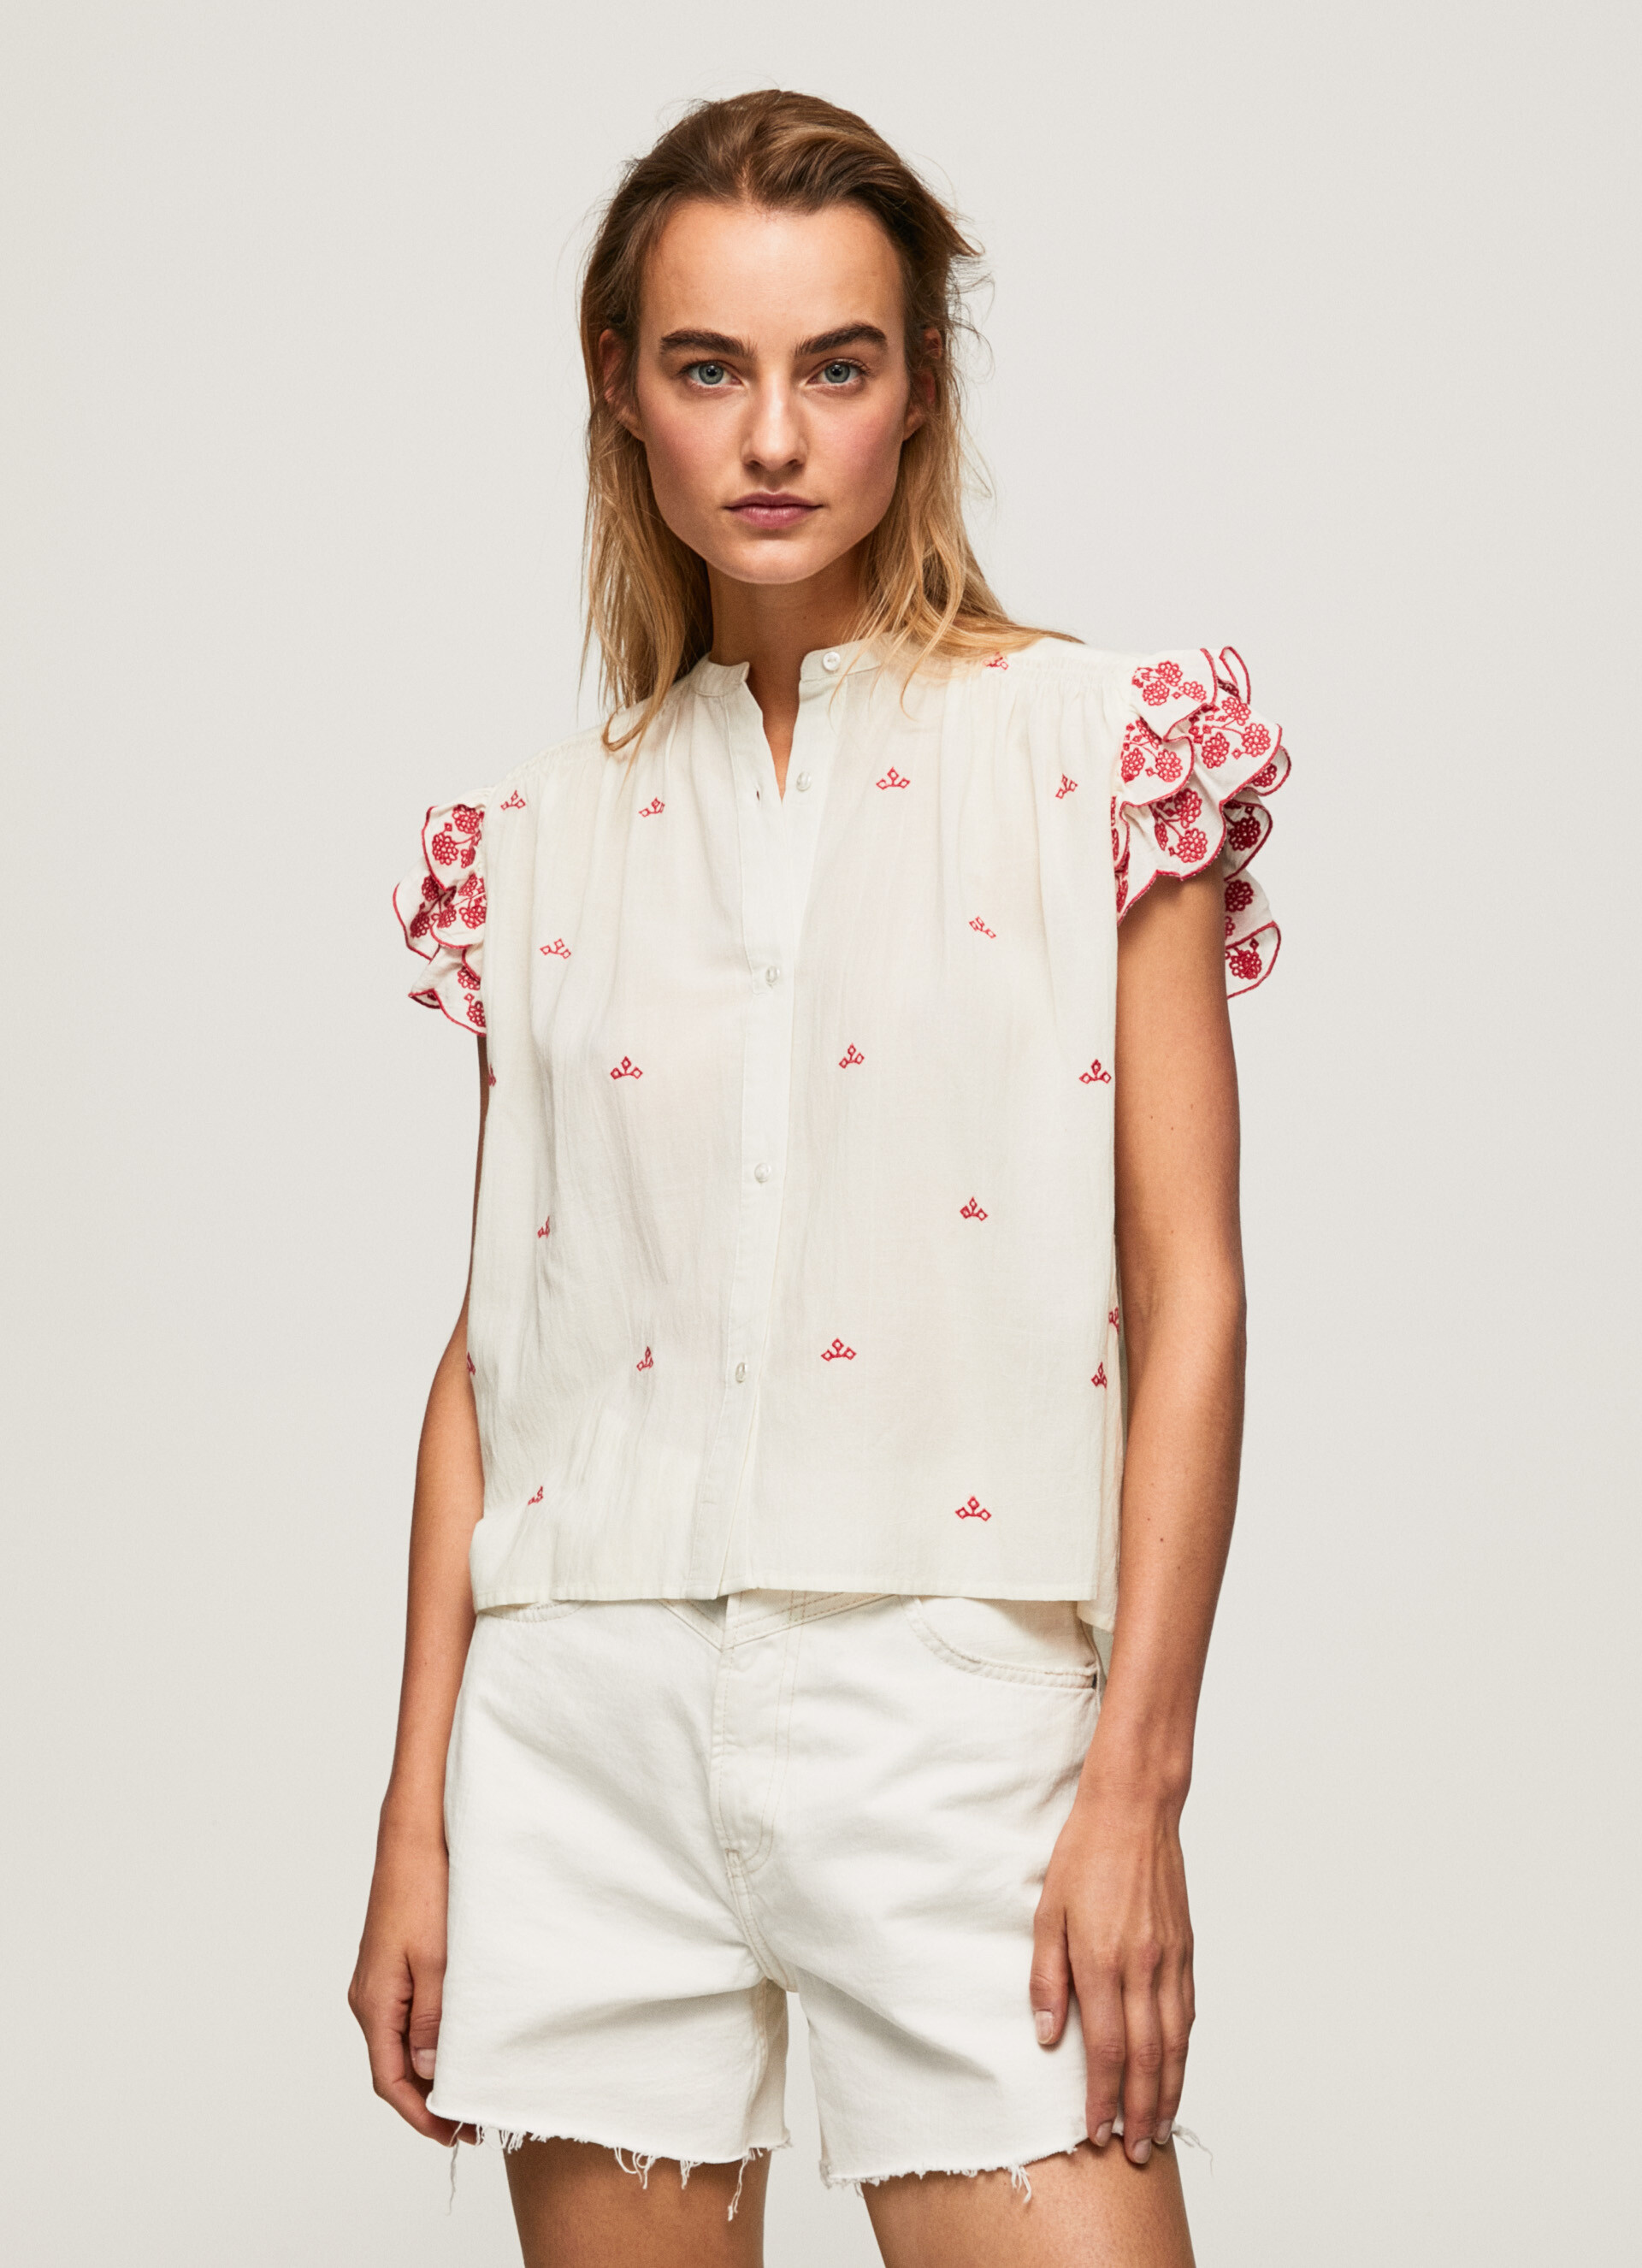 Pepe Jeans - Patterned shirt, White, large image number 3